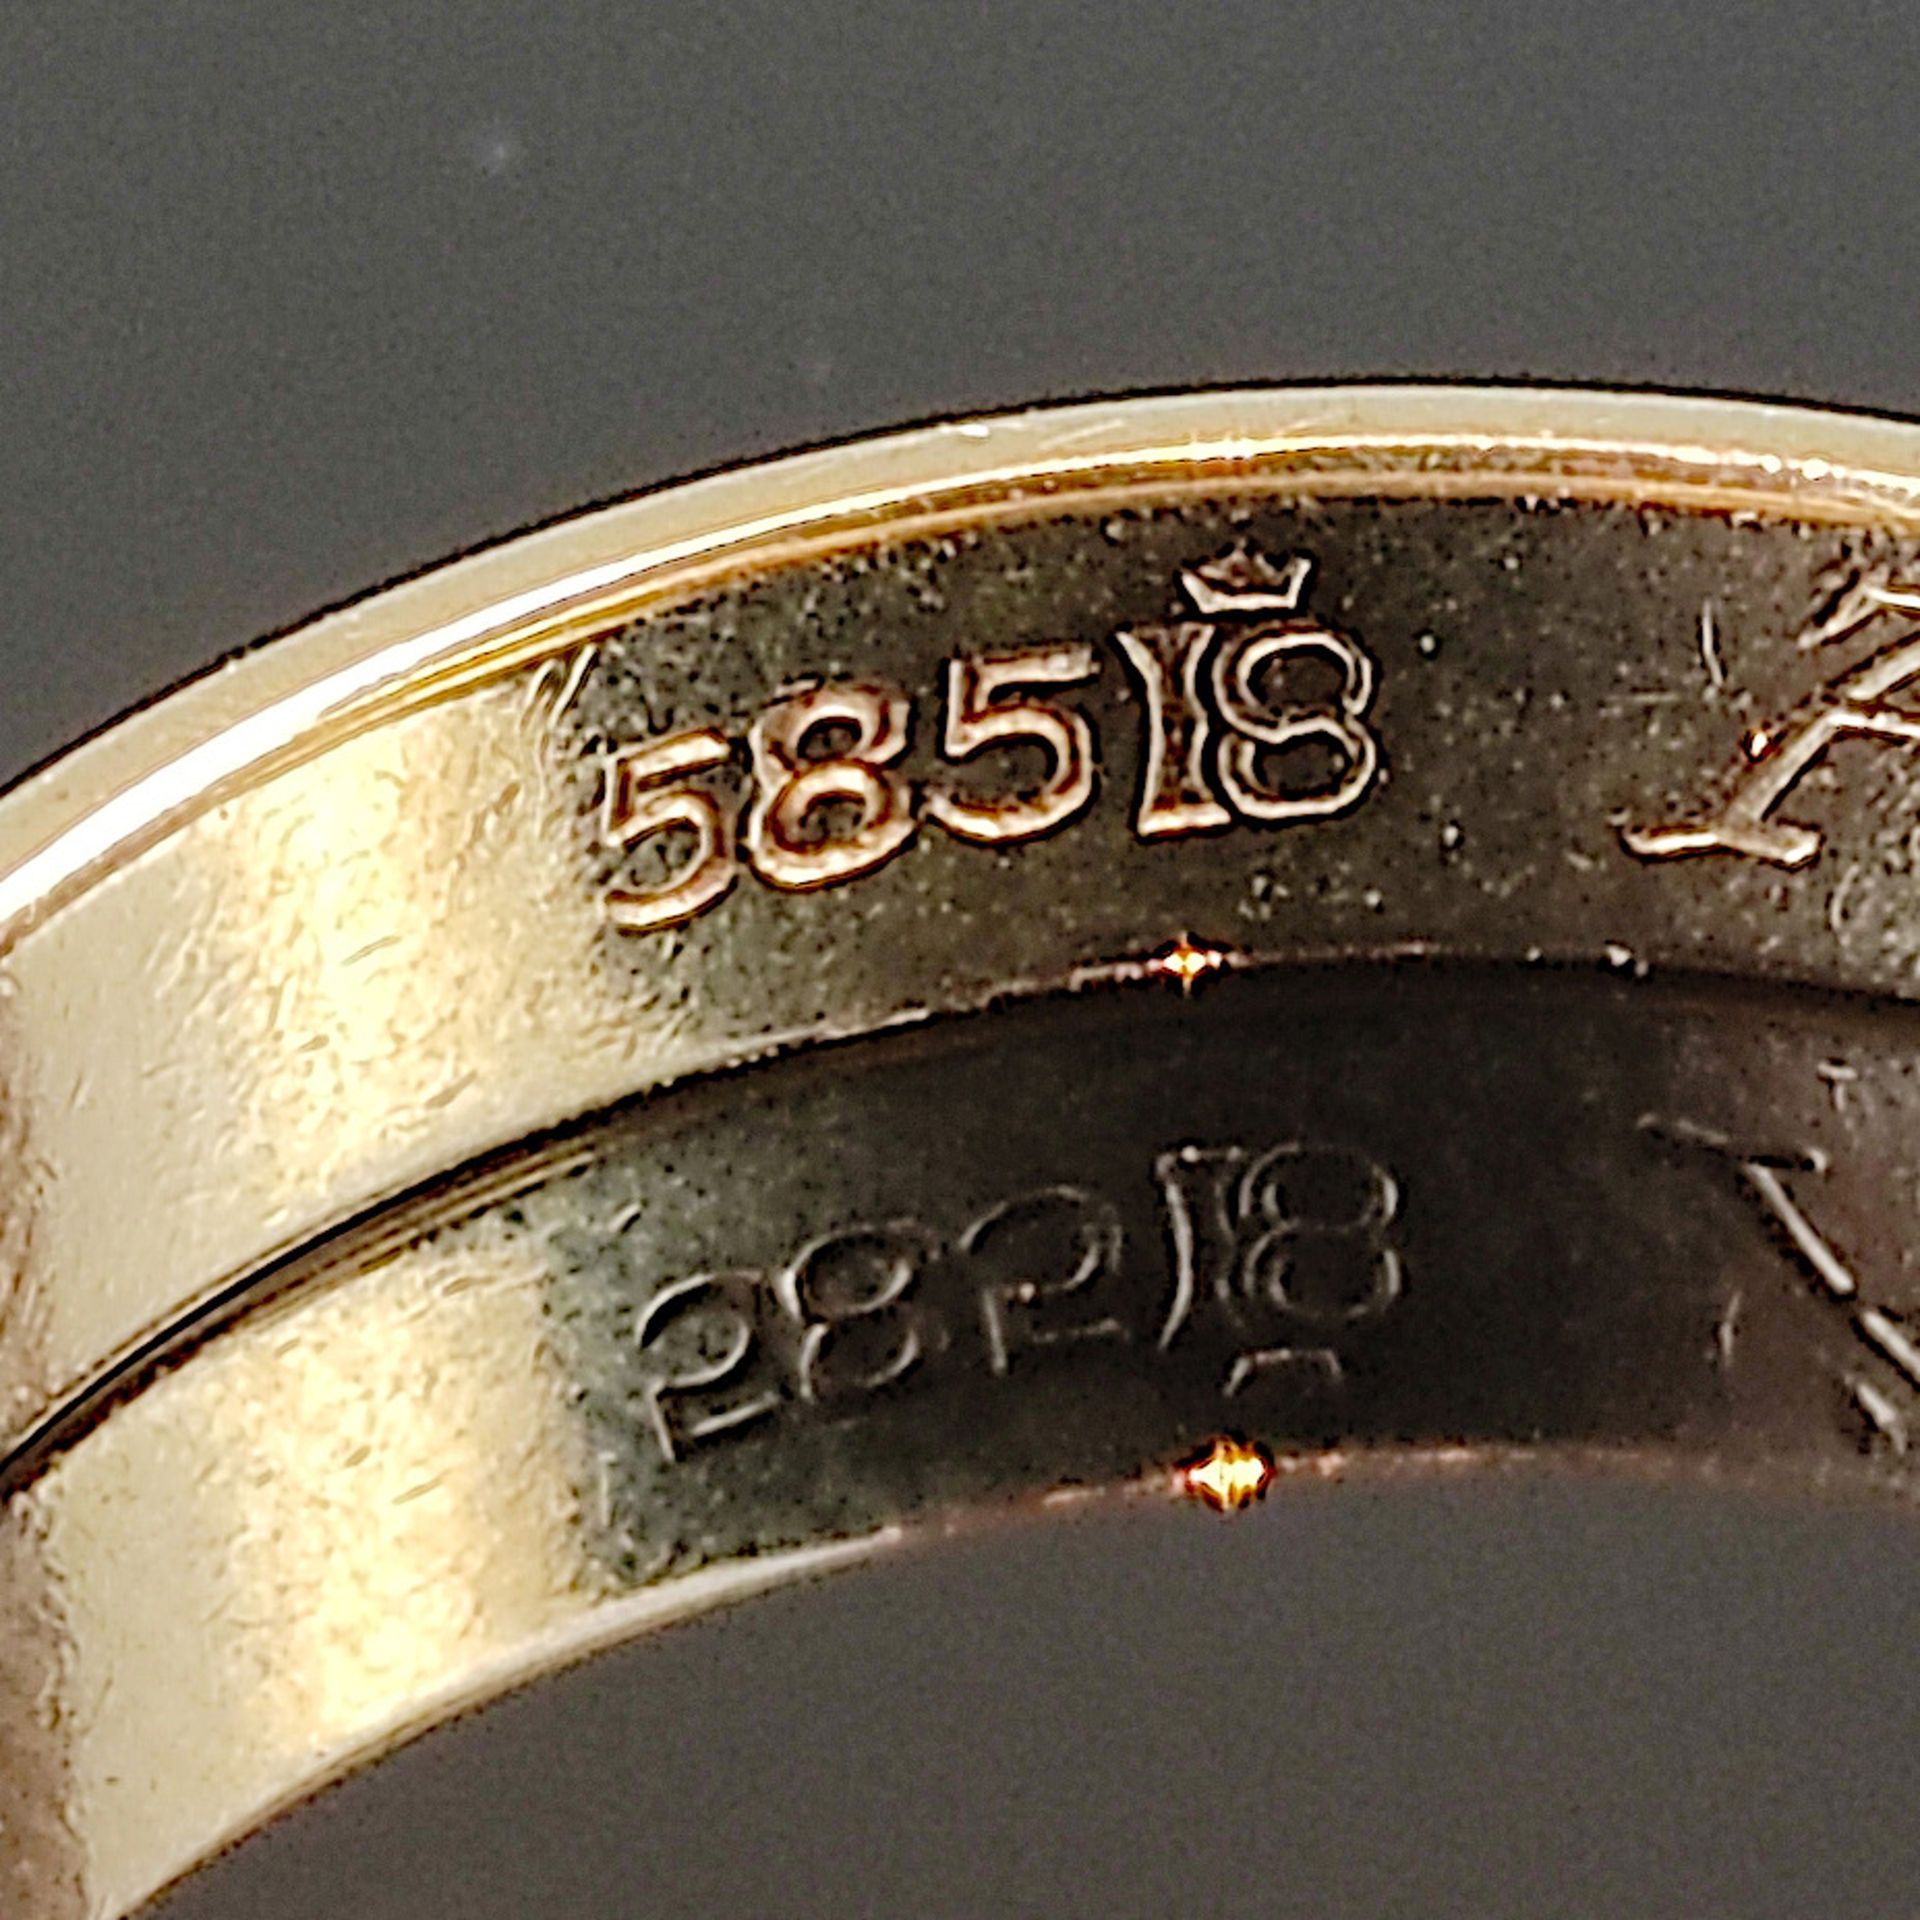 Pair of gold rings, 585/14K yellow gold (hallmarked), 7.8g, textured surface, each with engraving i - Image 2 of 3